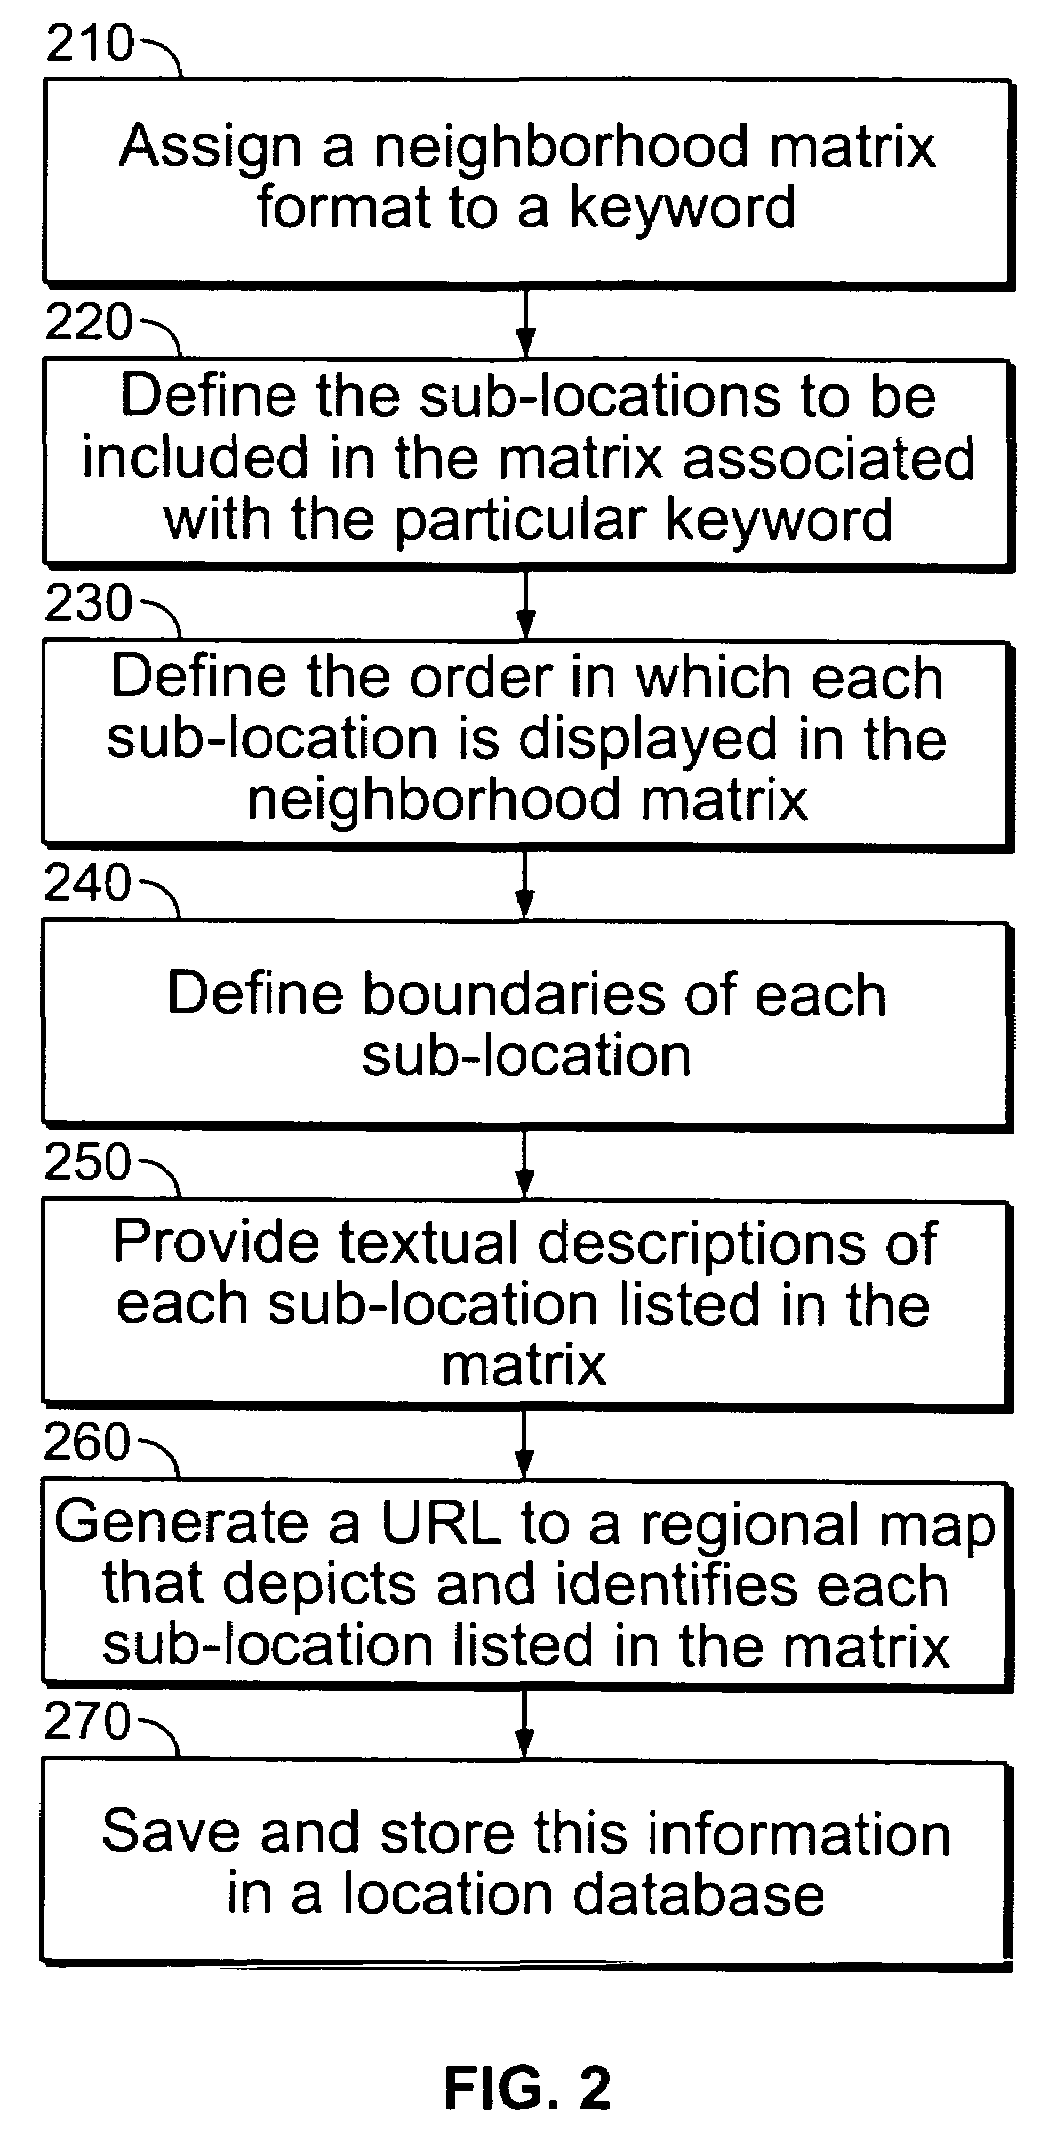 System and method for providing travel related product information on an interactive display having neighborhood categories